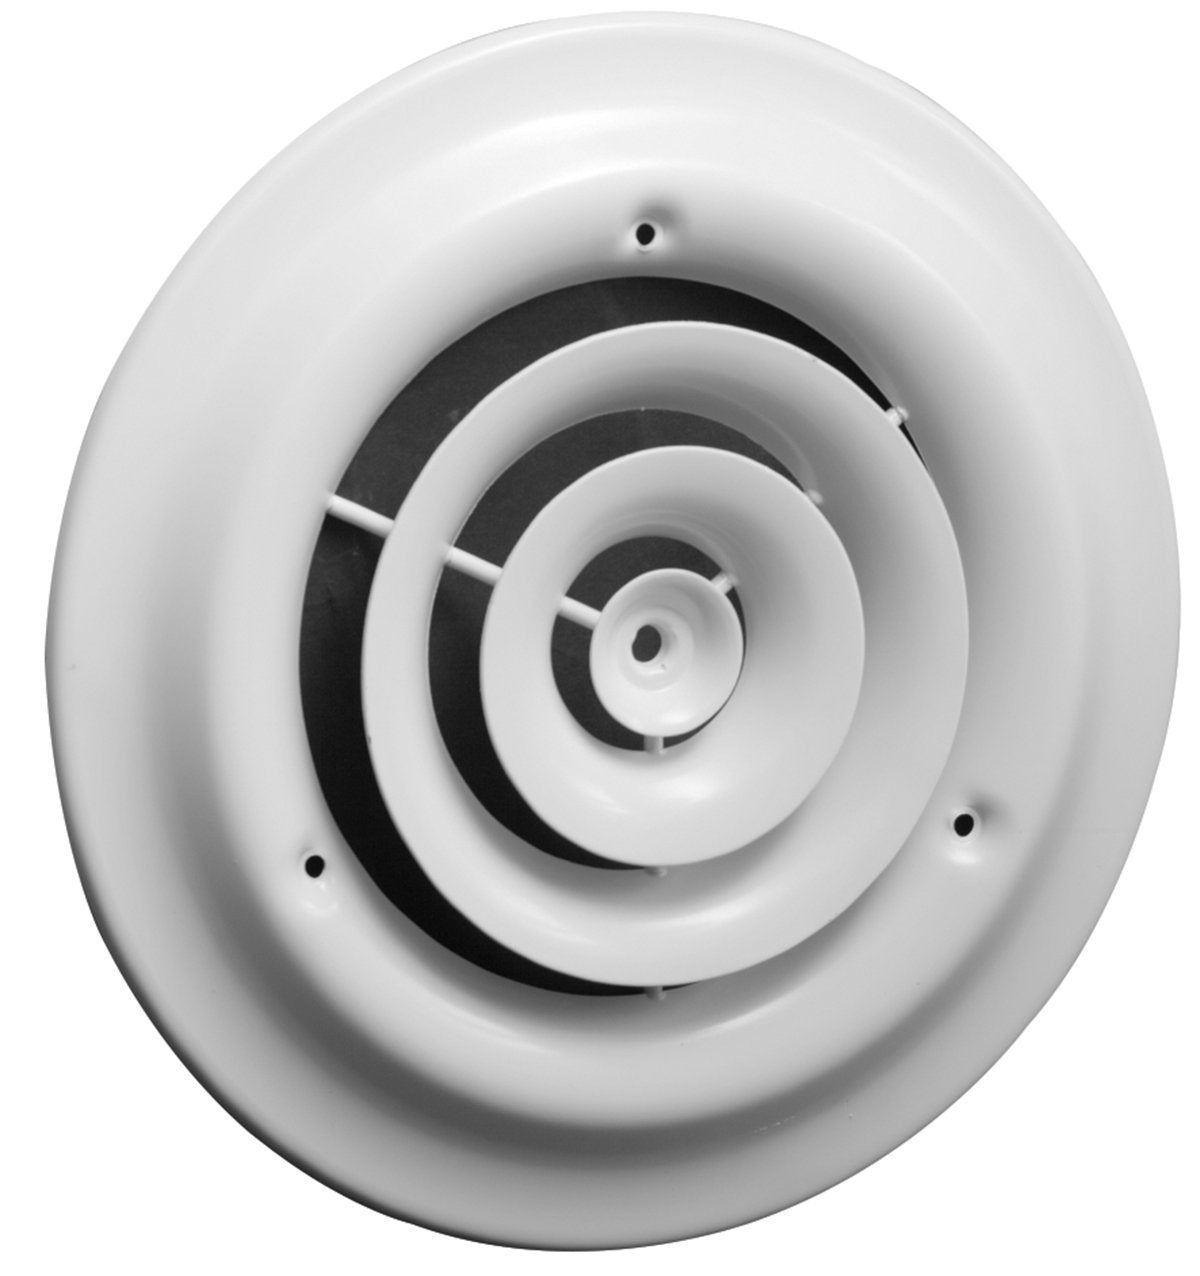 White 8" Round Ceiling Diffuser - Easy Air Flow - HVAC Duct 